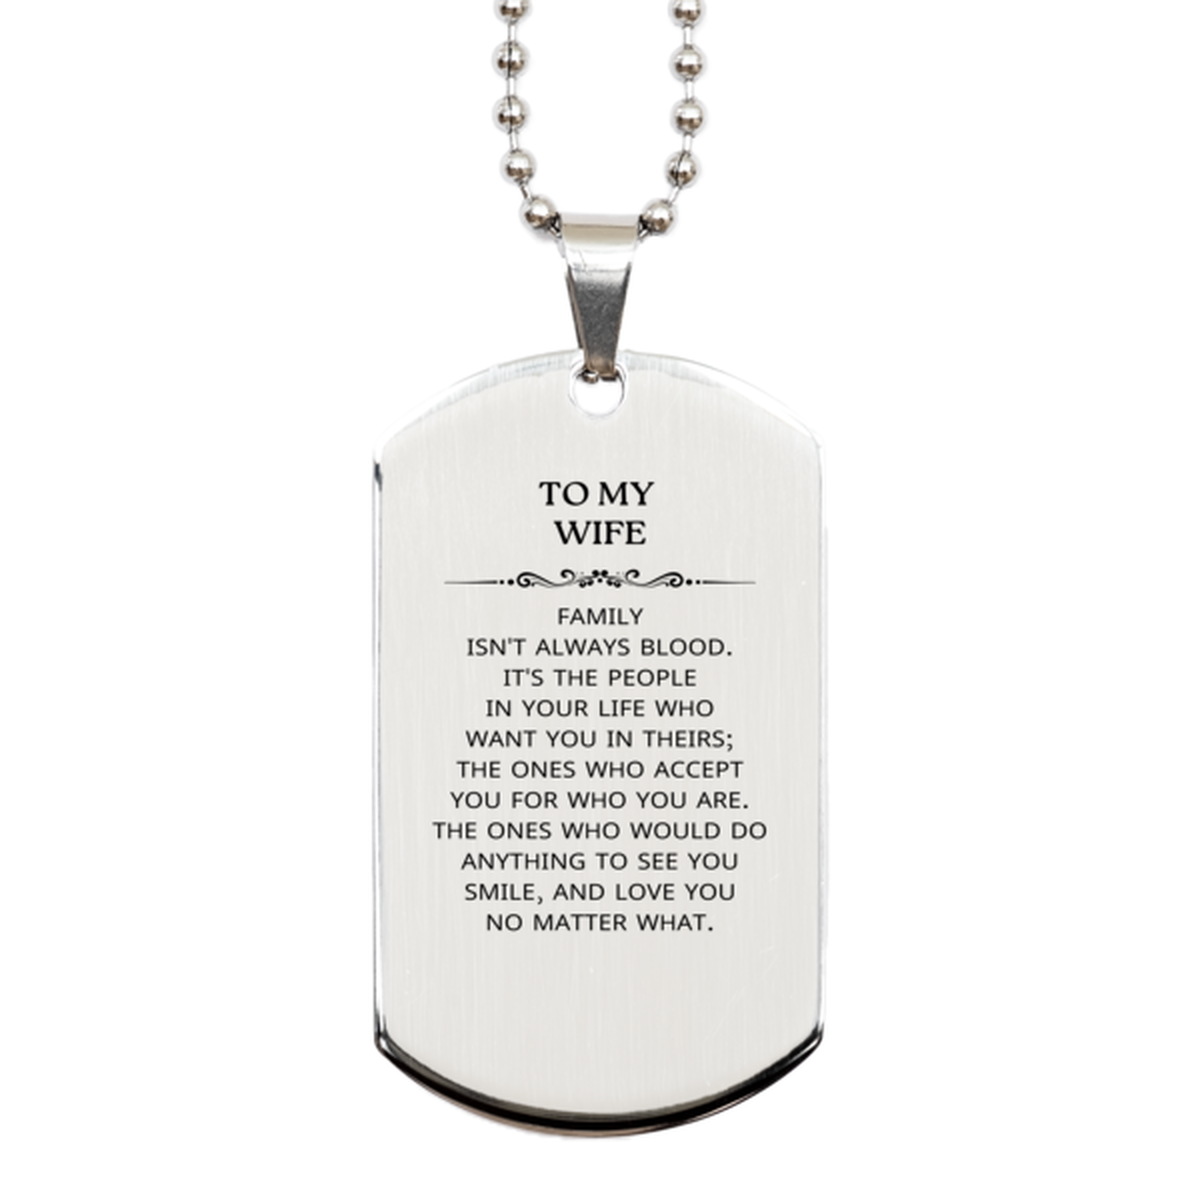 To My Wife Gifts, Family isn't always blood, Wife Silver Dog Tag, Birthday Christmas Unique Present For Wife